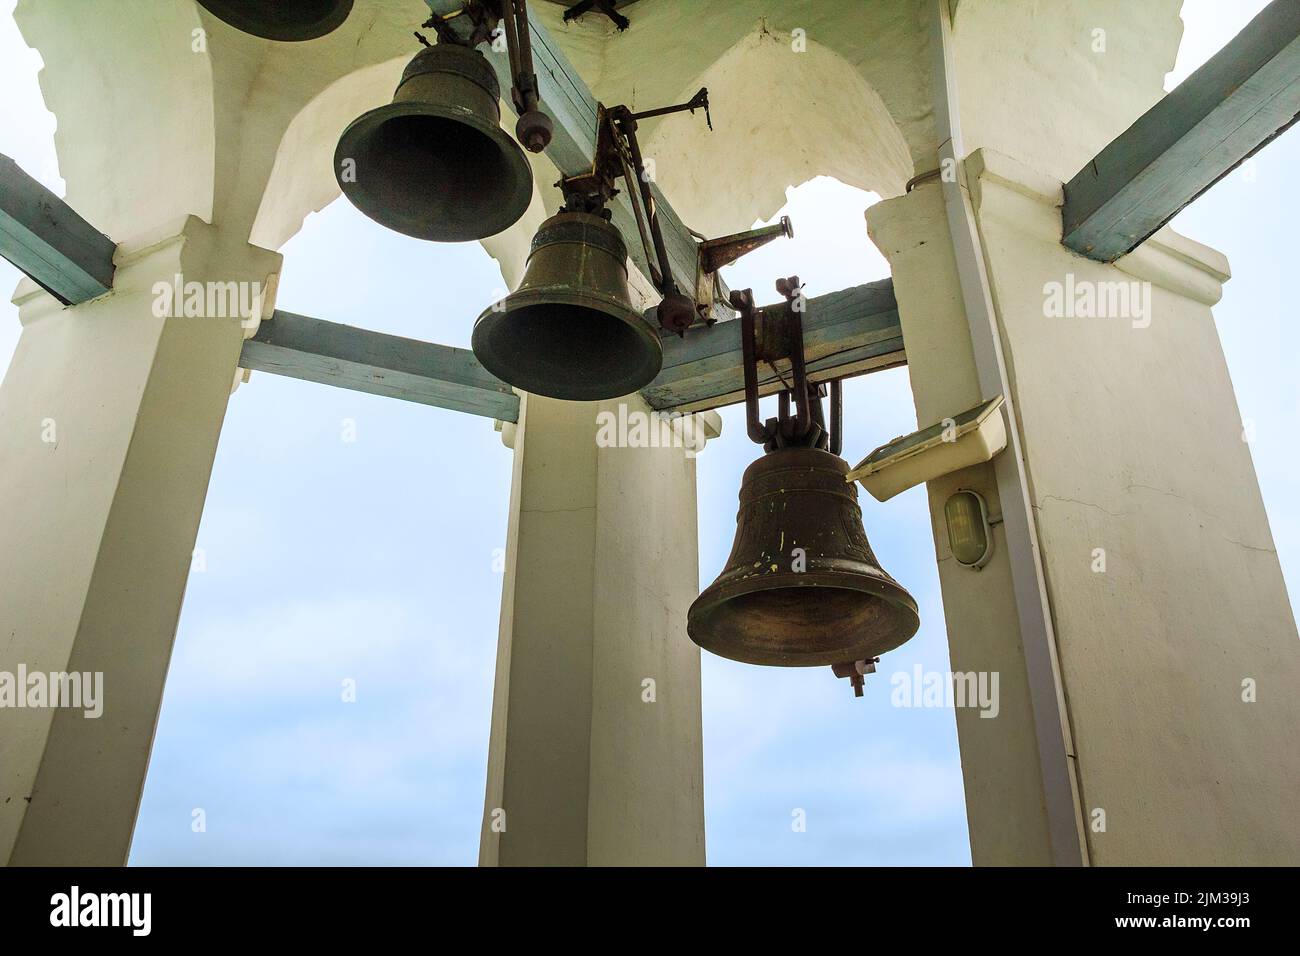 These are bells on the belfry of the Holy Transfiguration Monastery of the 16th century May 23, 2013 in Yaroslavl, Russia. Stock Photo